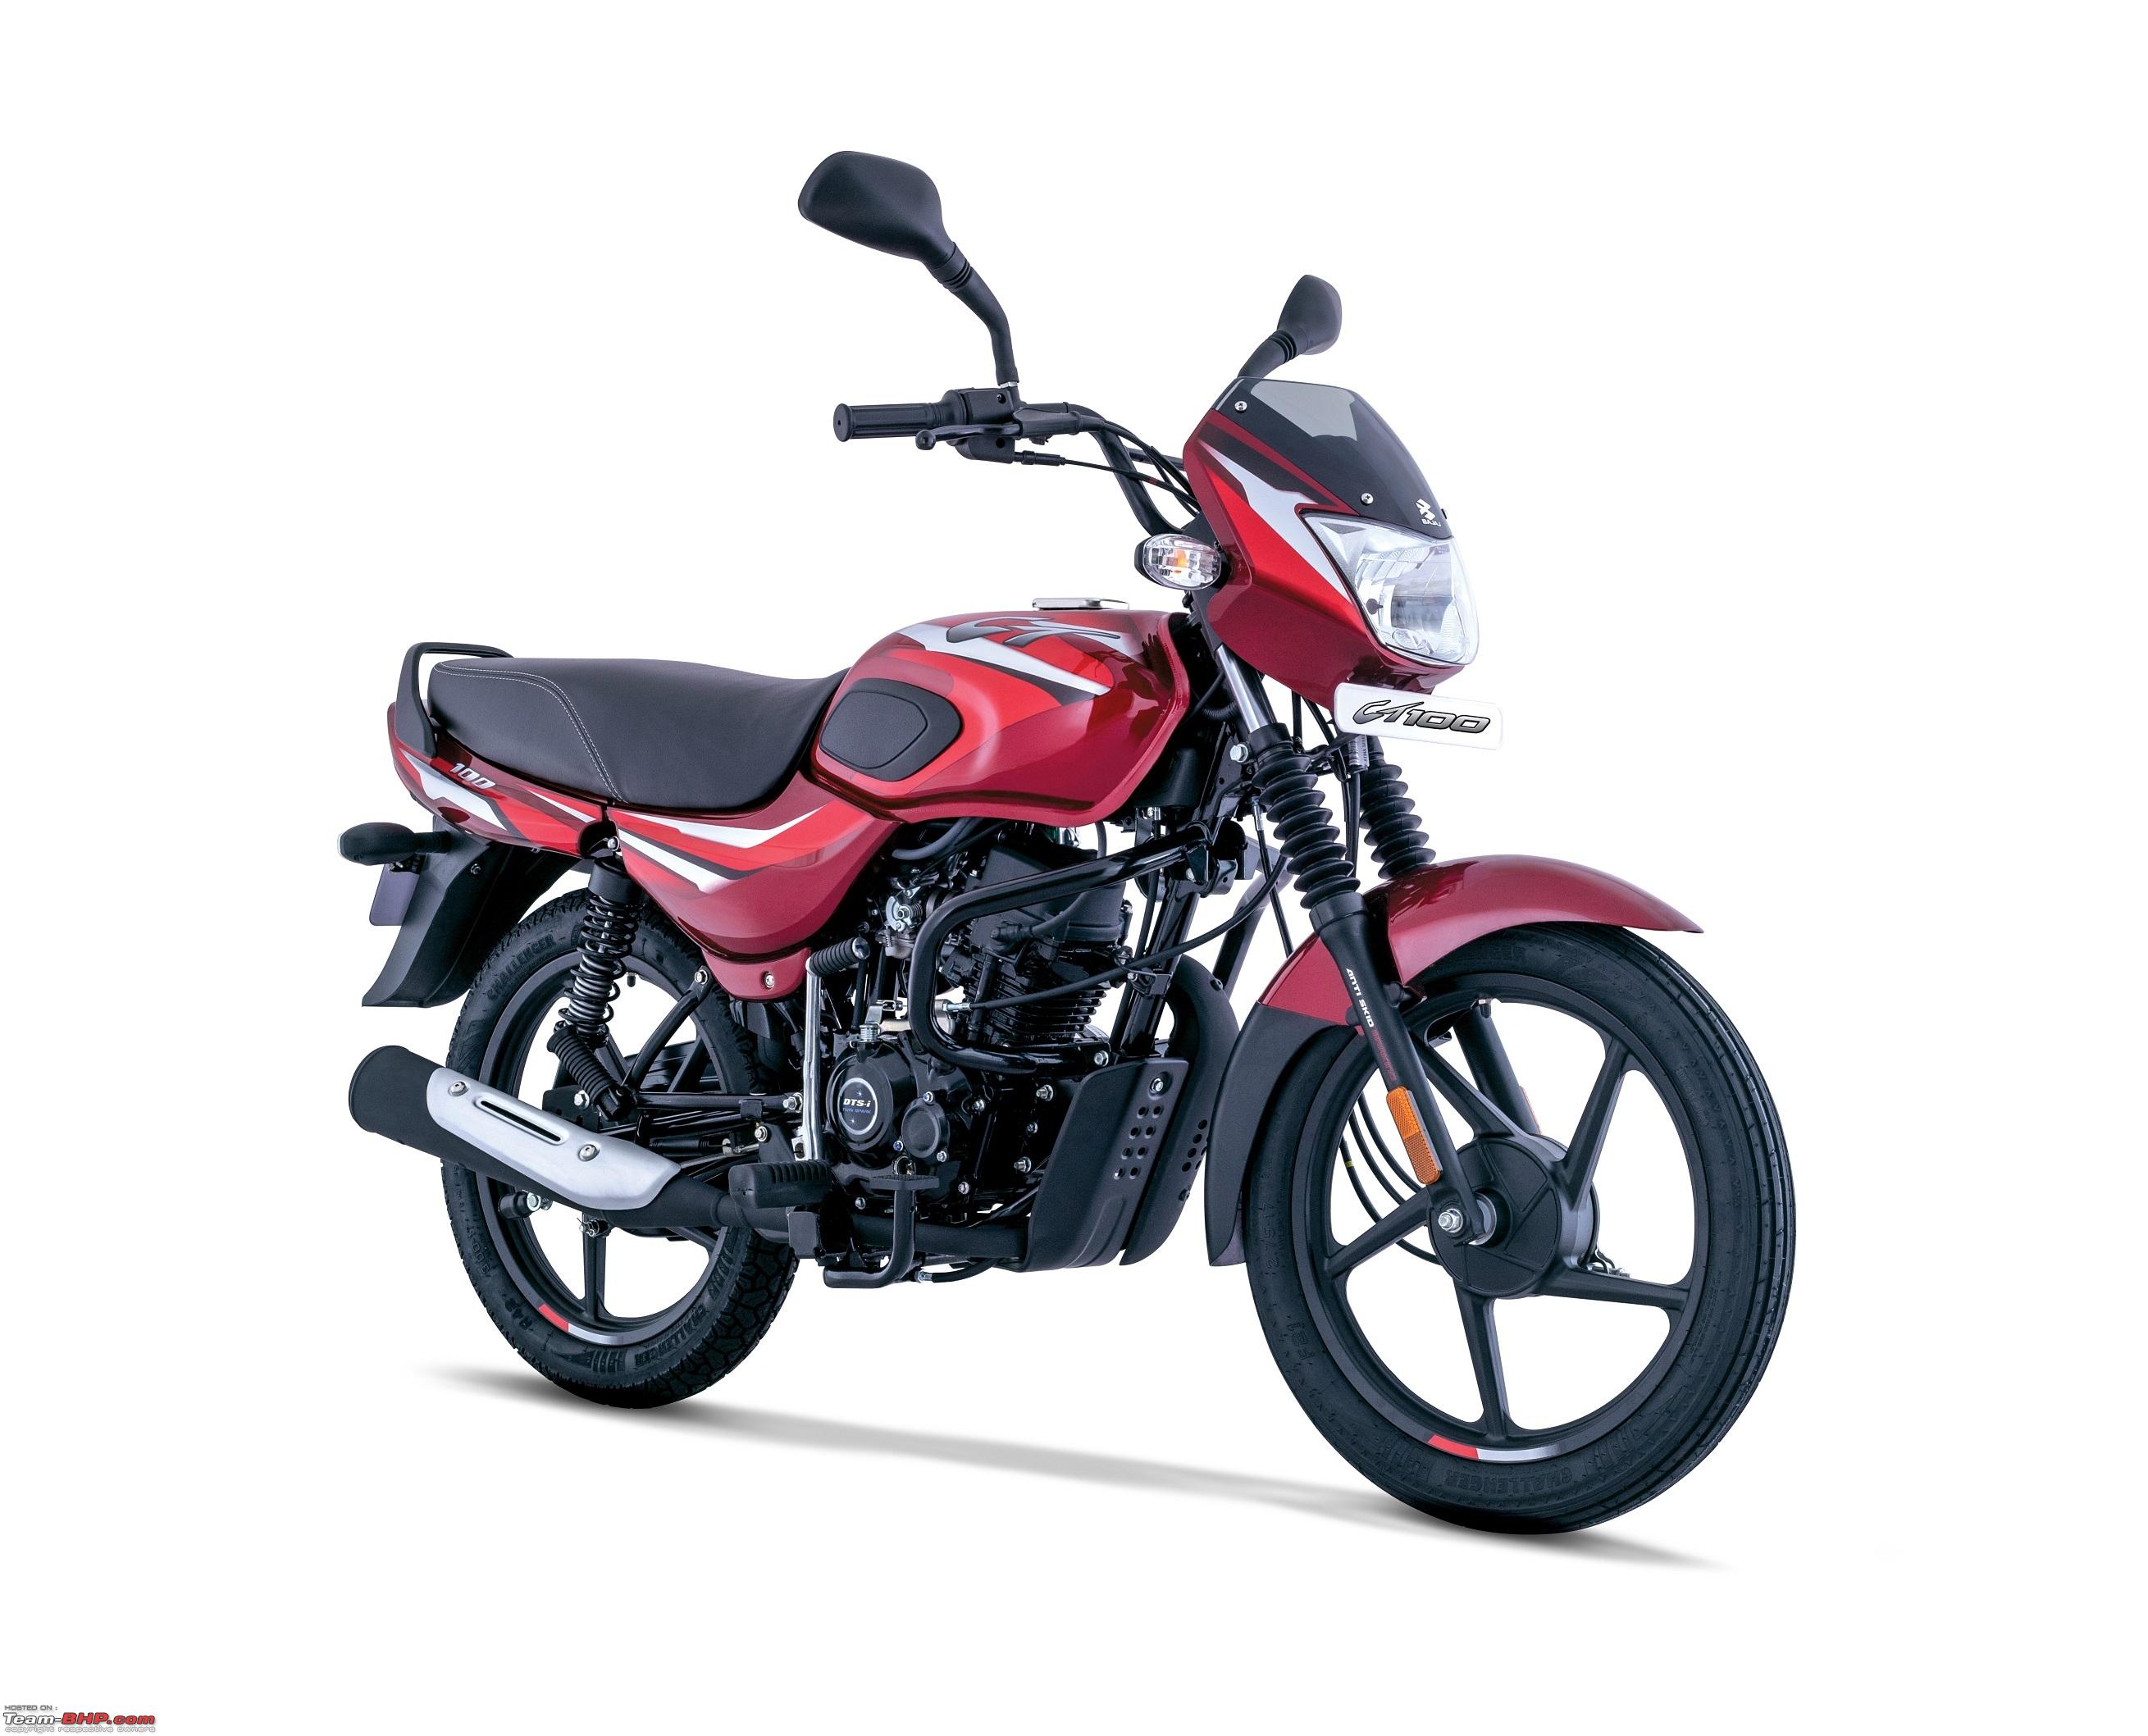 Bajaj CT100 gets 8 new features; priced at Rs. 46,432 TeamBHP